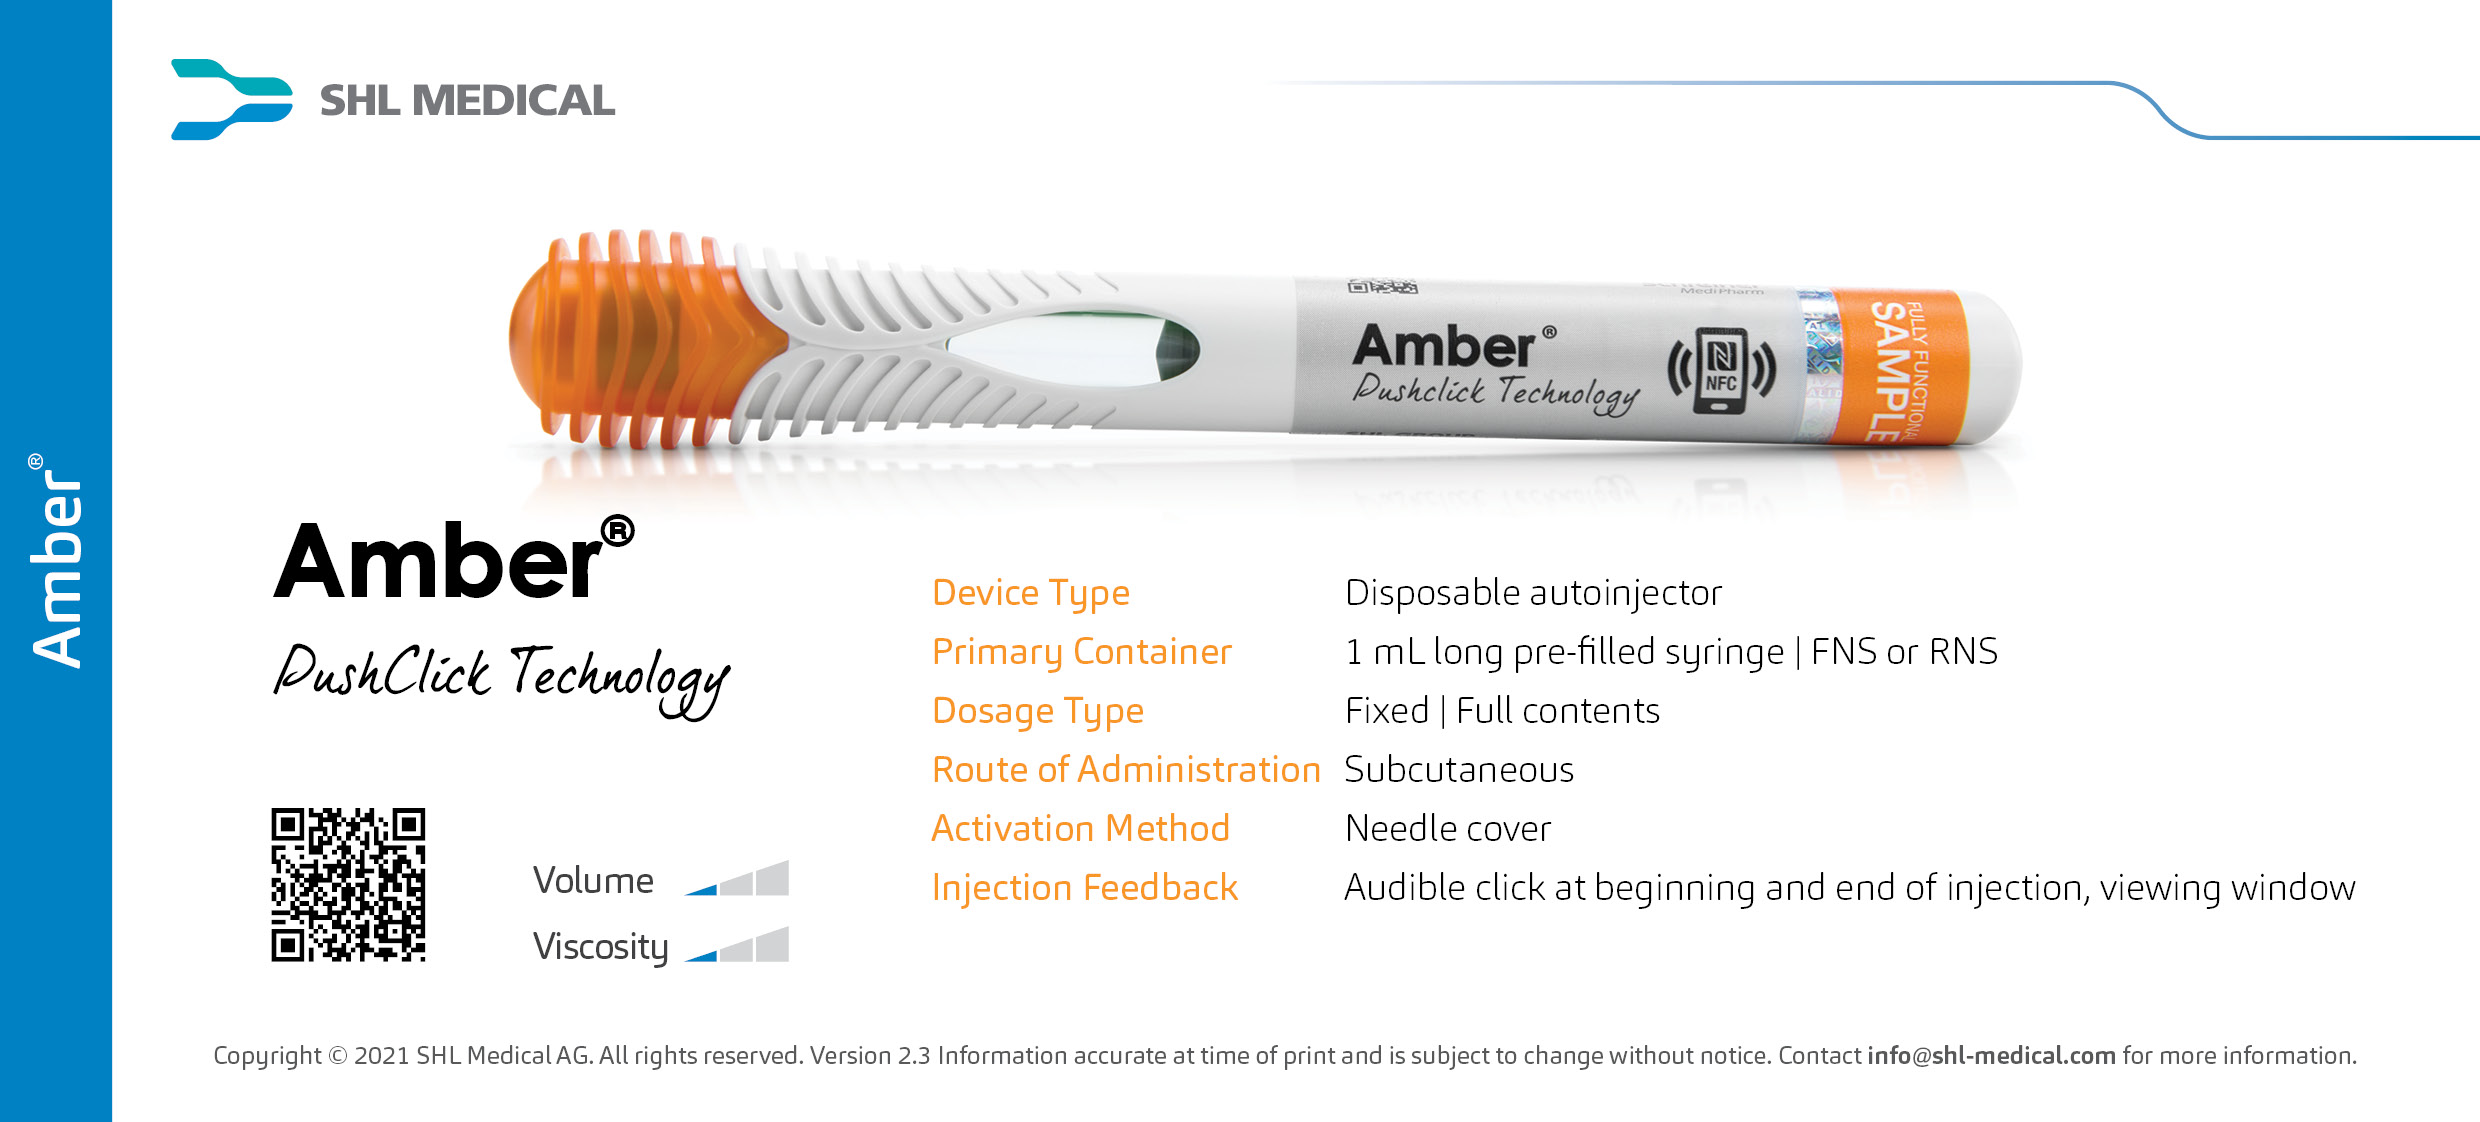 Image of standard Amber autoinjector developed by SHL Medical along with its specifications and handling instruction